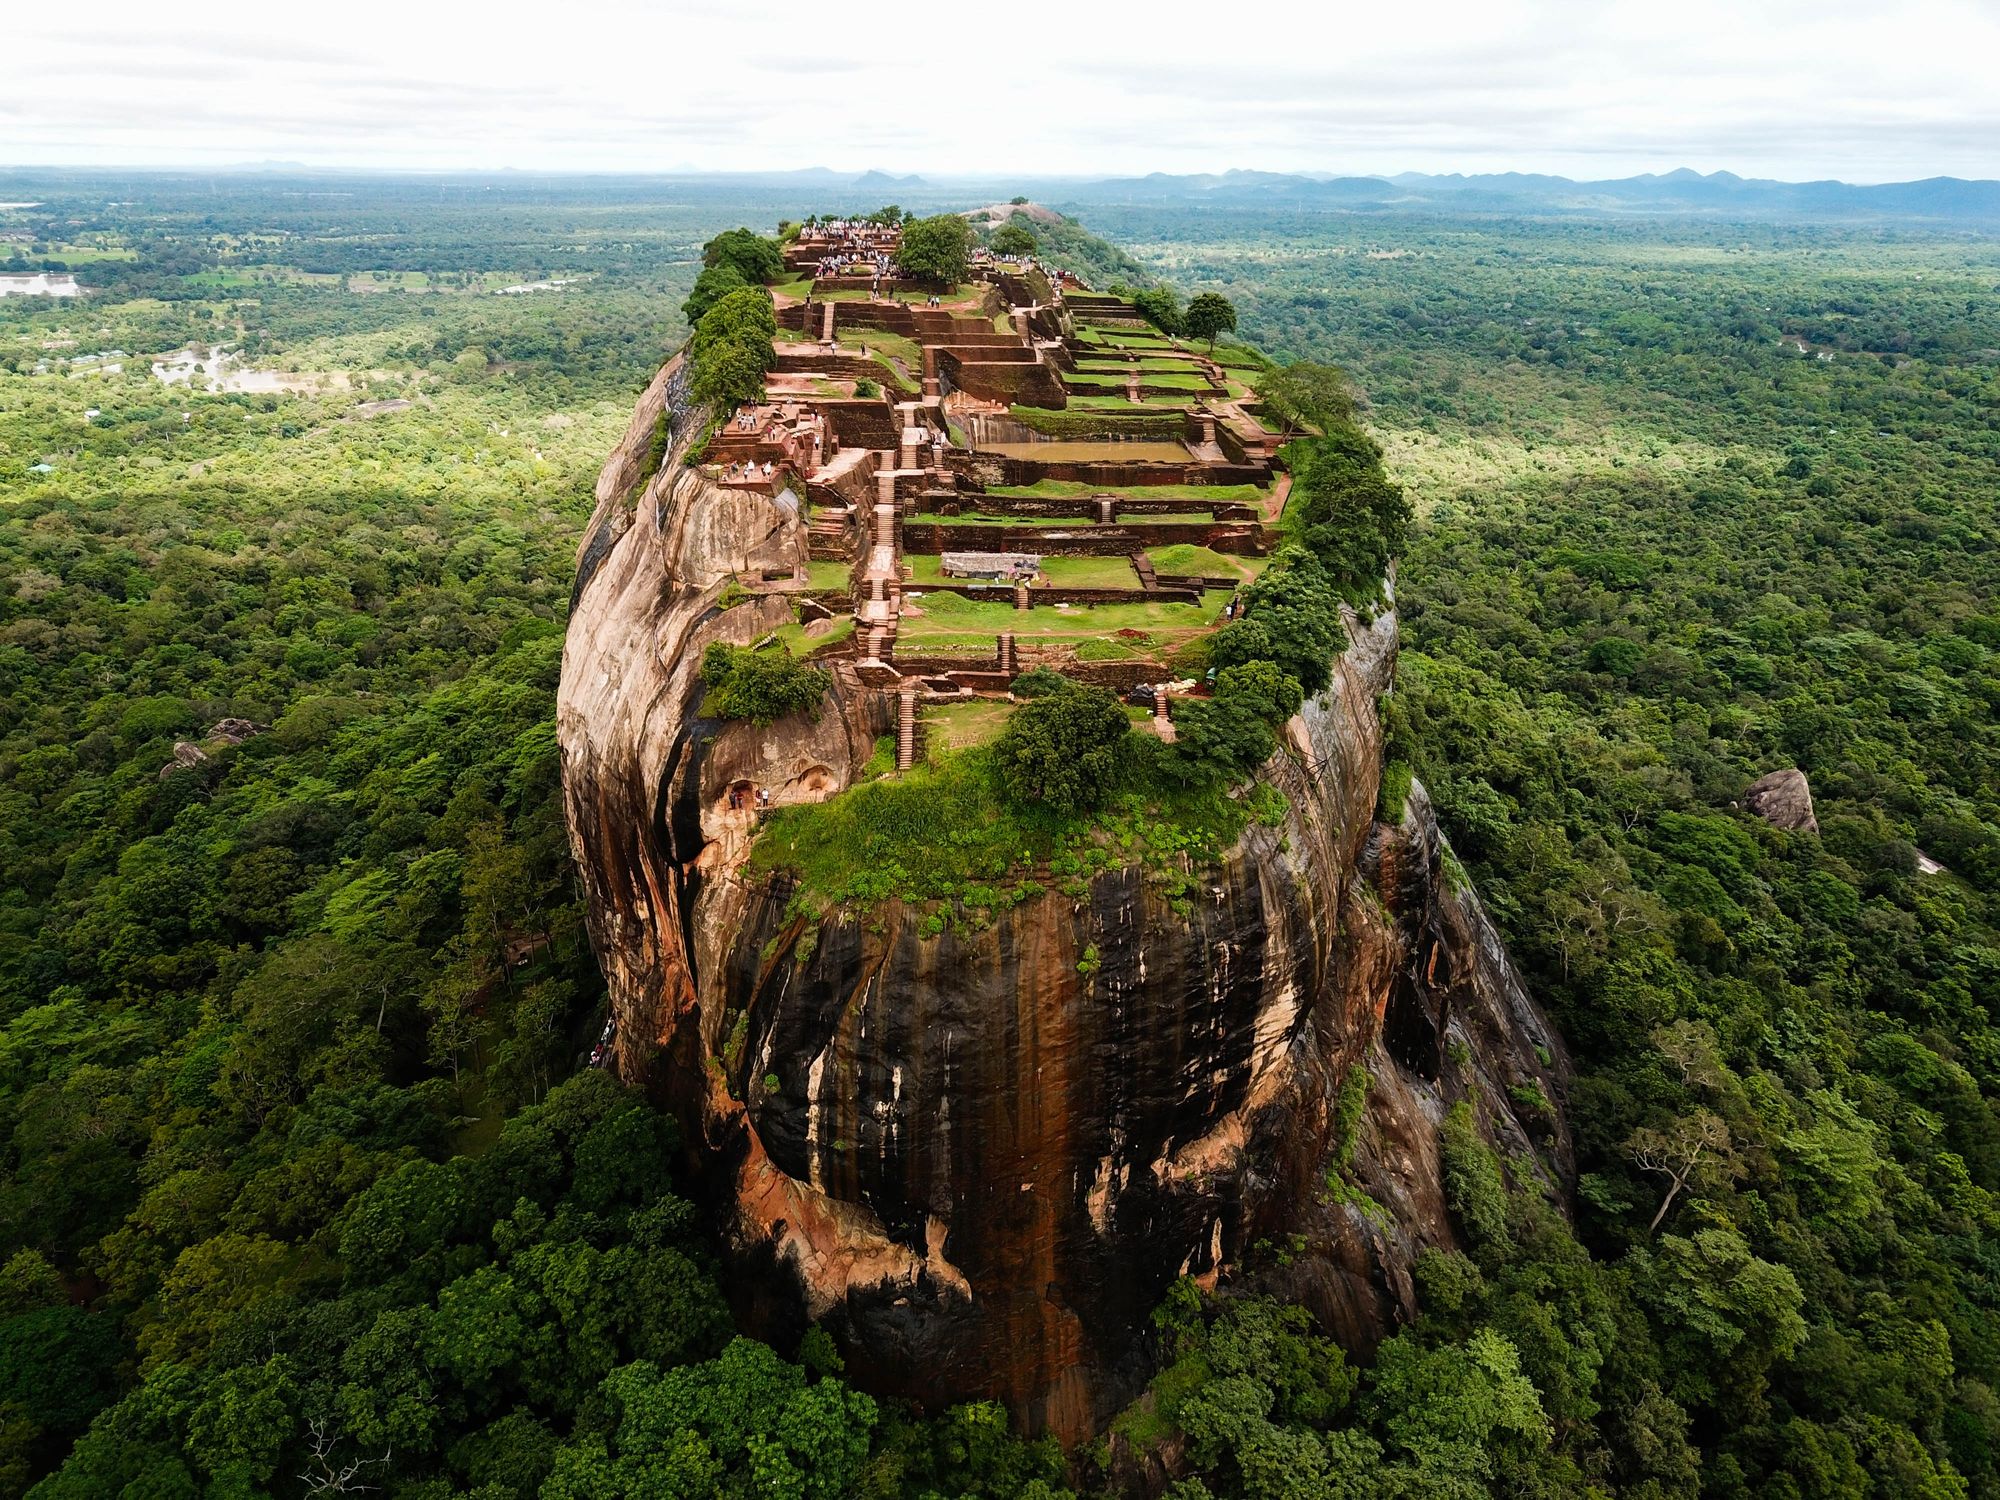 An aerial view of Sigiriya, the rock fortress in Sri Lanka, that shows the ruins of the ancient palace on top of the rock.